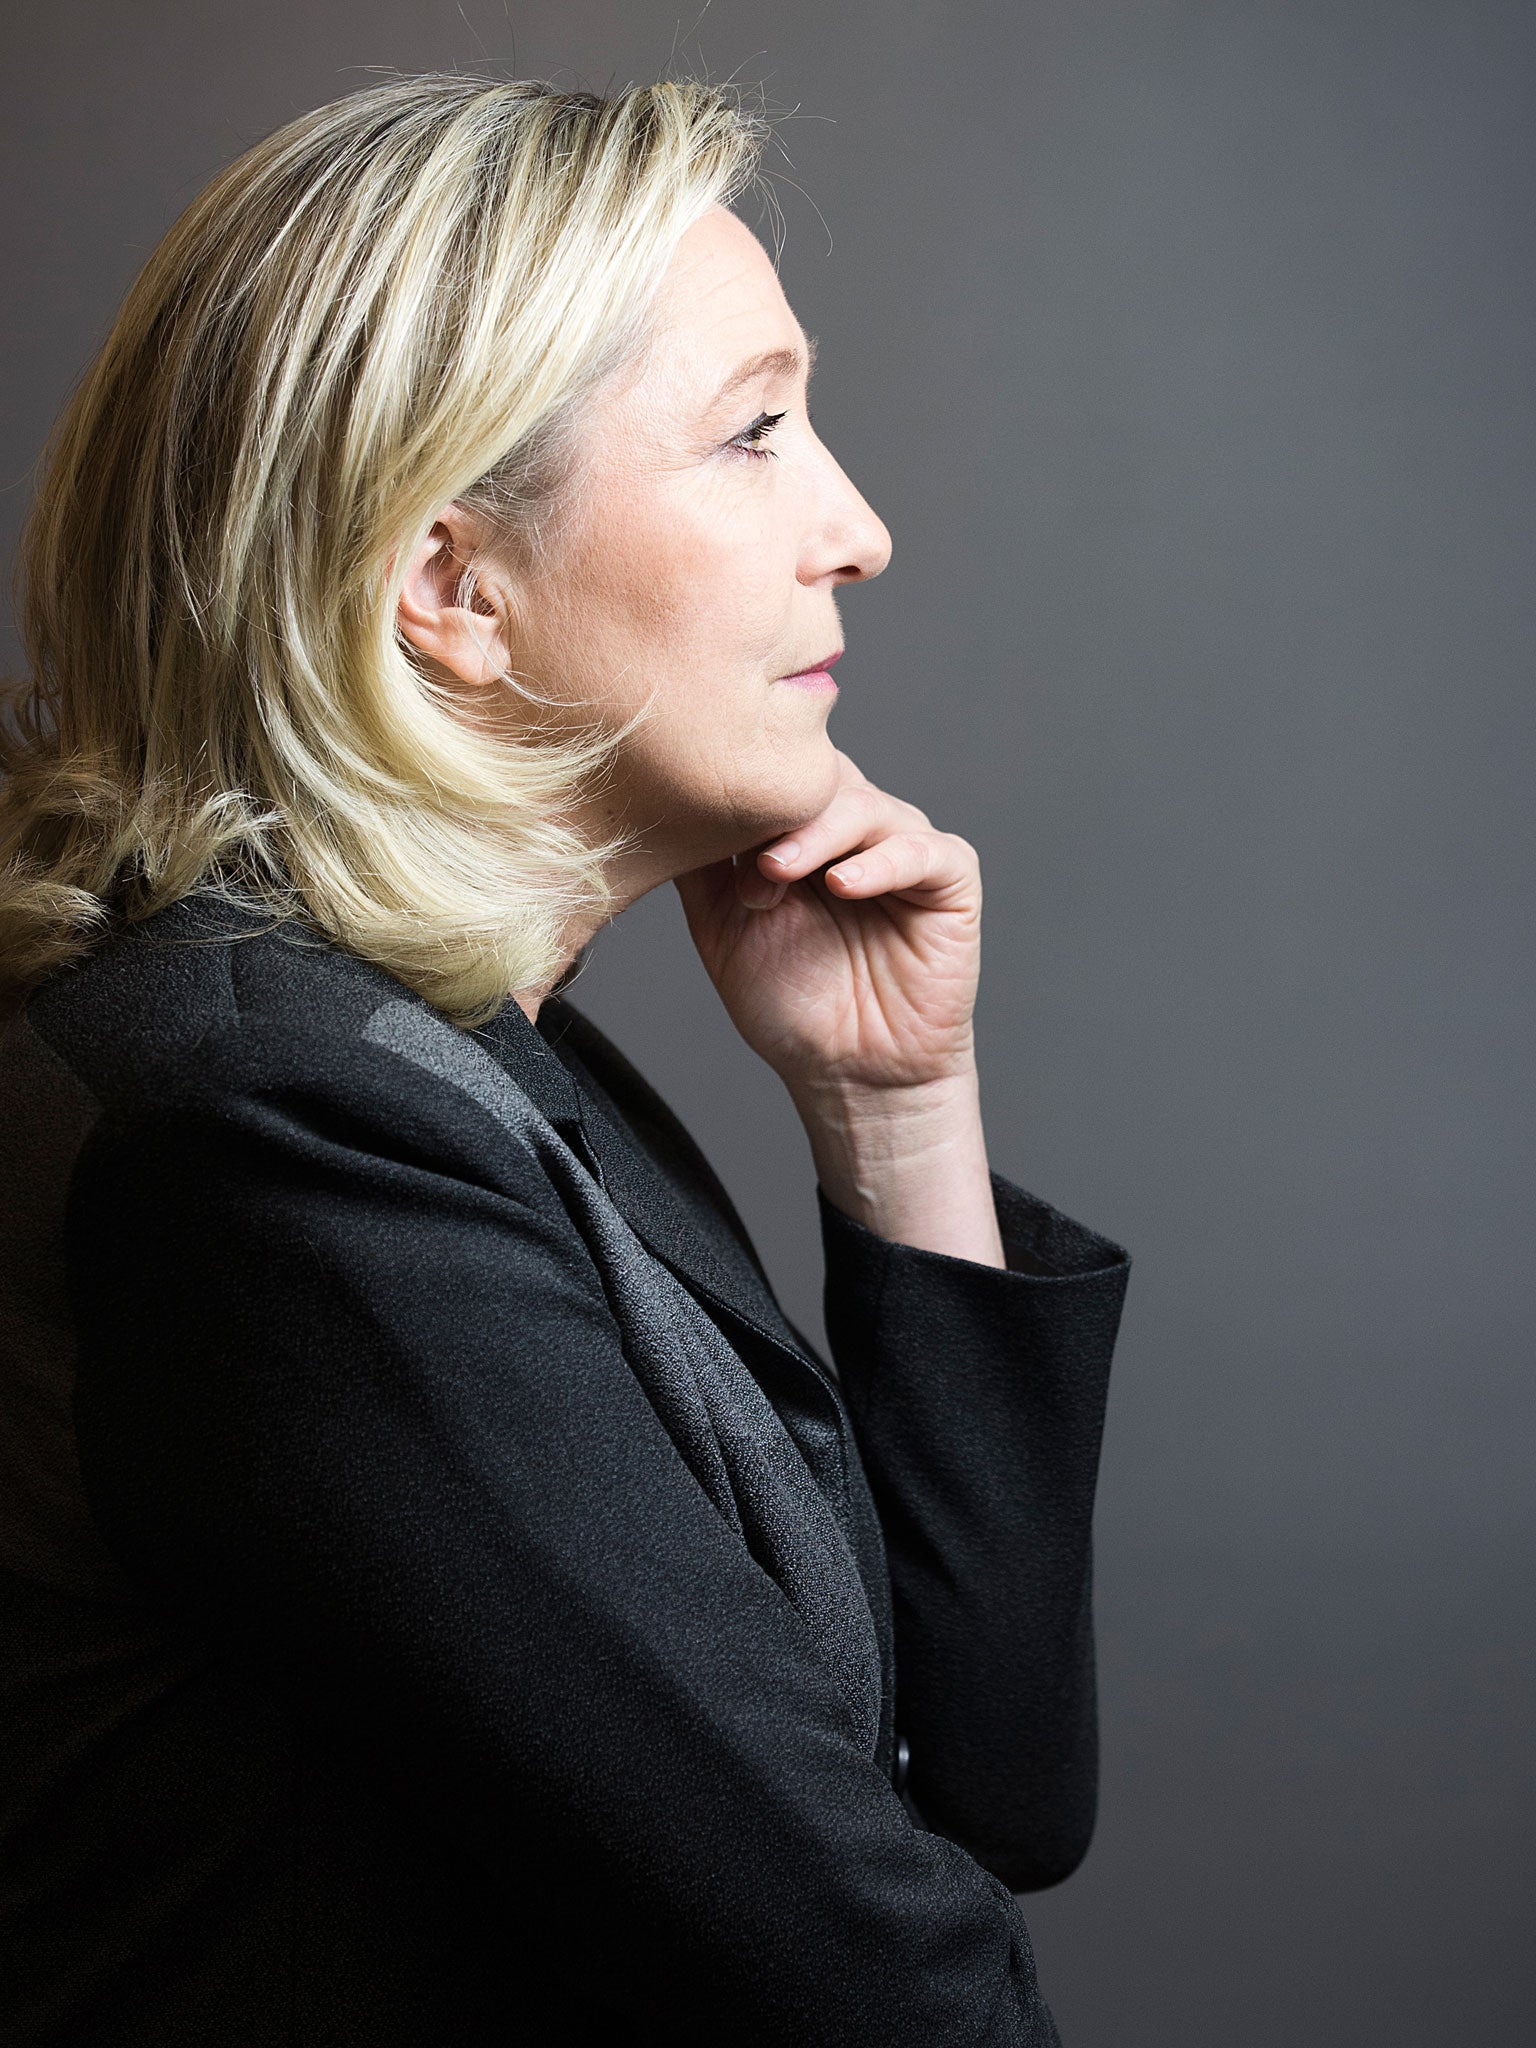 The FN’s Marine Le Pen could be left re-faced